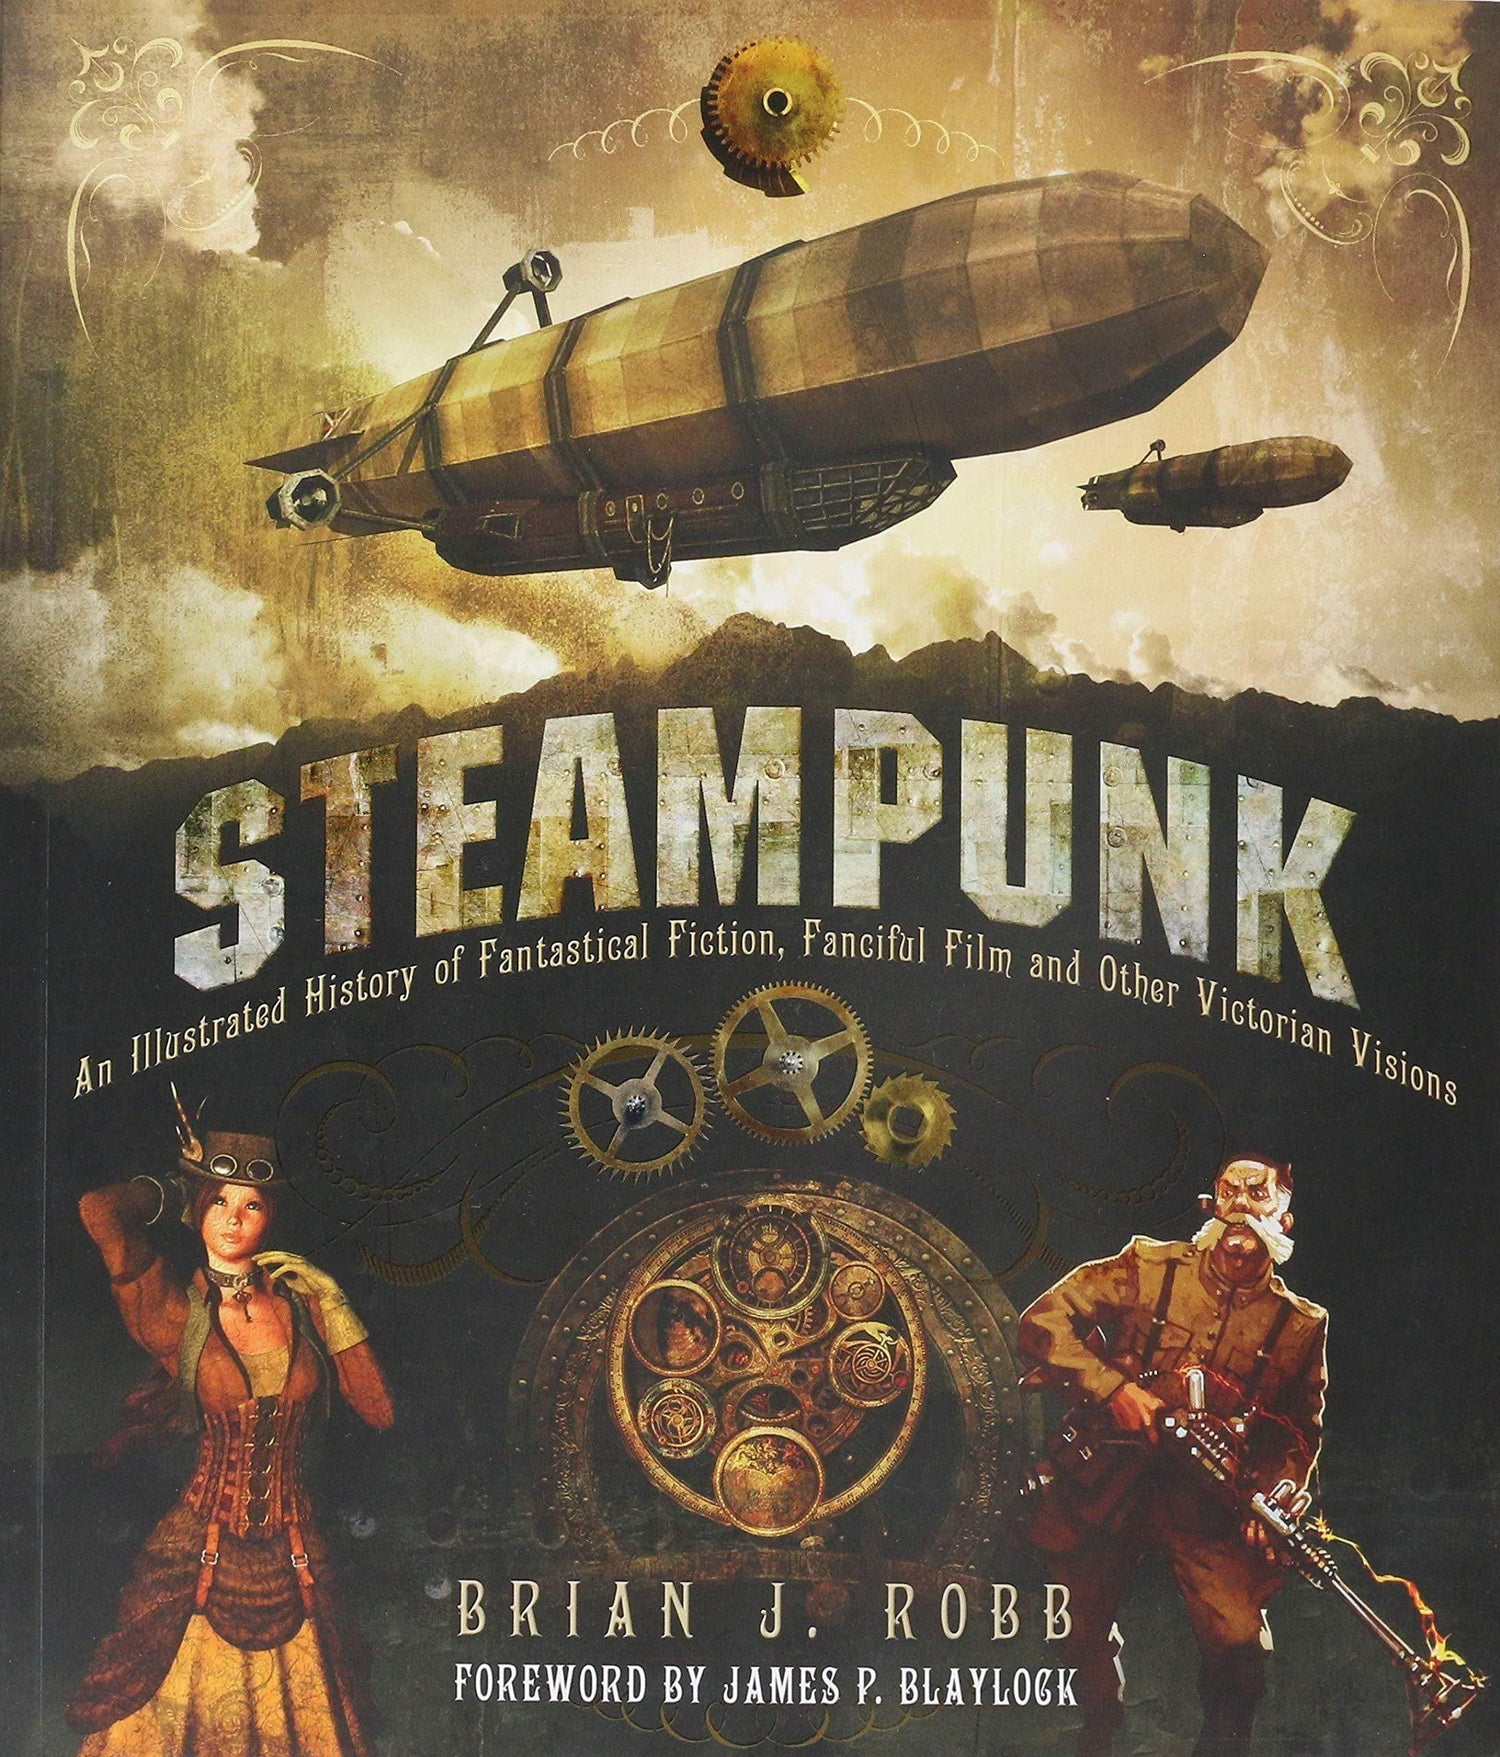 Steampunk: An Illustrated History Of Fantastical Fiction, Fanciful Film And Other Victorian Visions